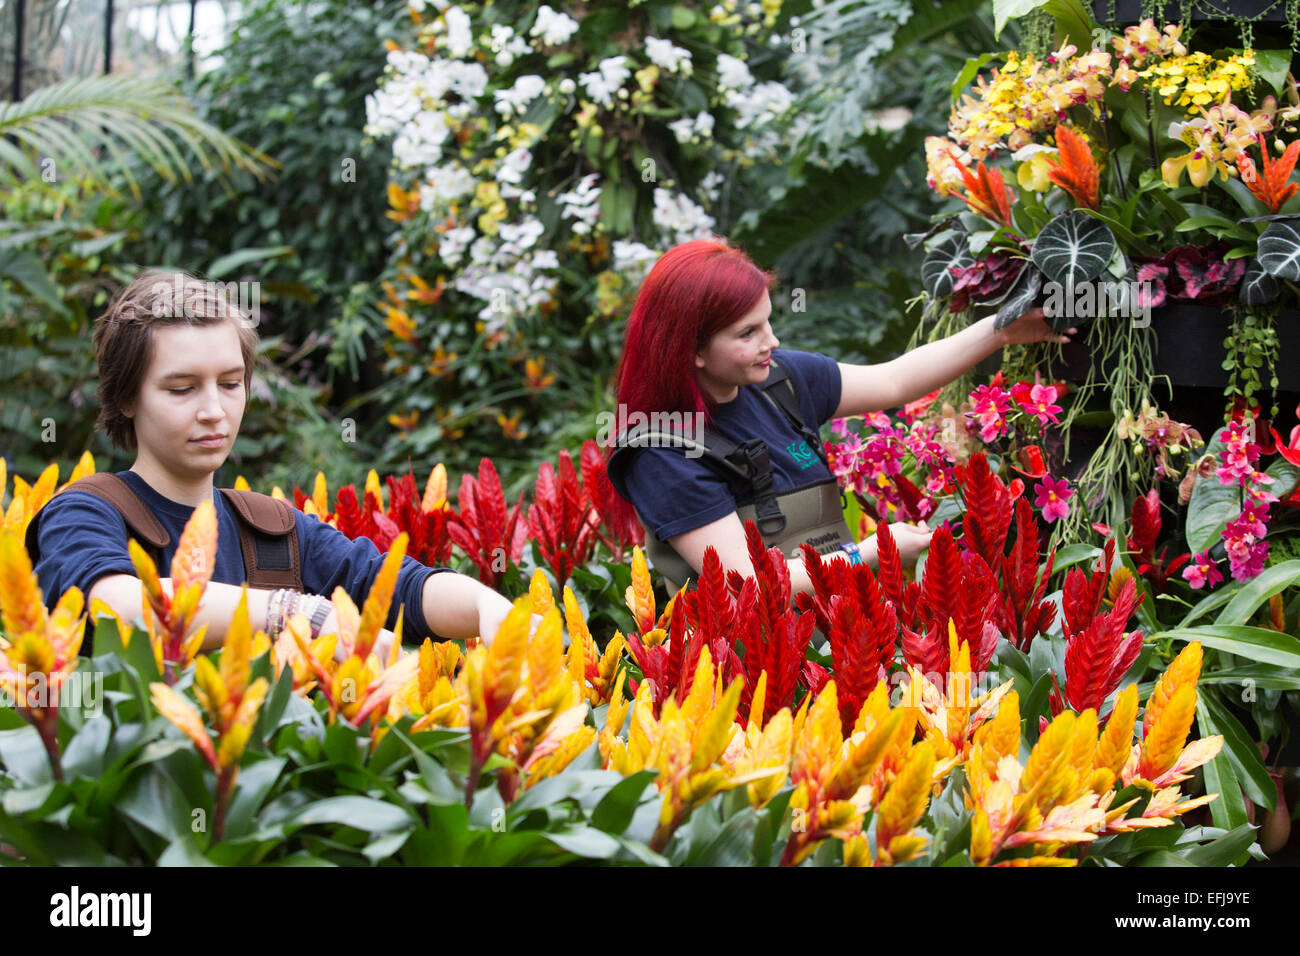 London, UK. 5 February 2015. Kew Gardens horticulturists prepare floral displays featuring bromeliads and orchids. 'Alluring Orchids' is the first festival on the Royal Botanic Gardens' 2015 calendar which showcases thousands of exotic and rare flowers in the Princess of Wales Conservatory from 7 February to 8 March 2015. Stock Photo